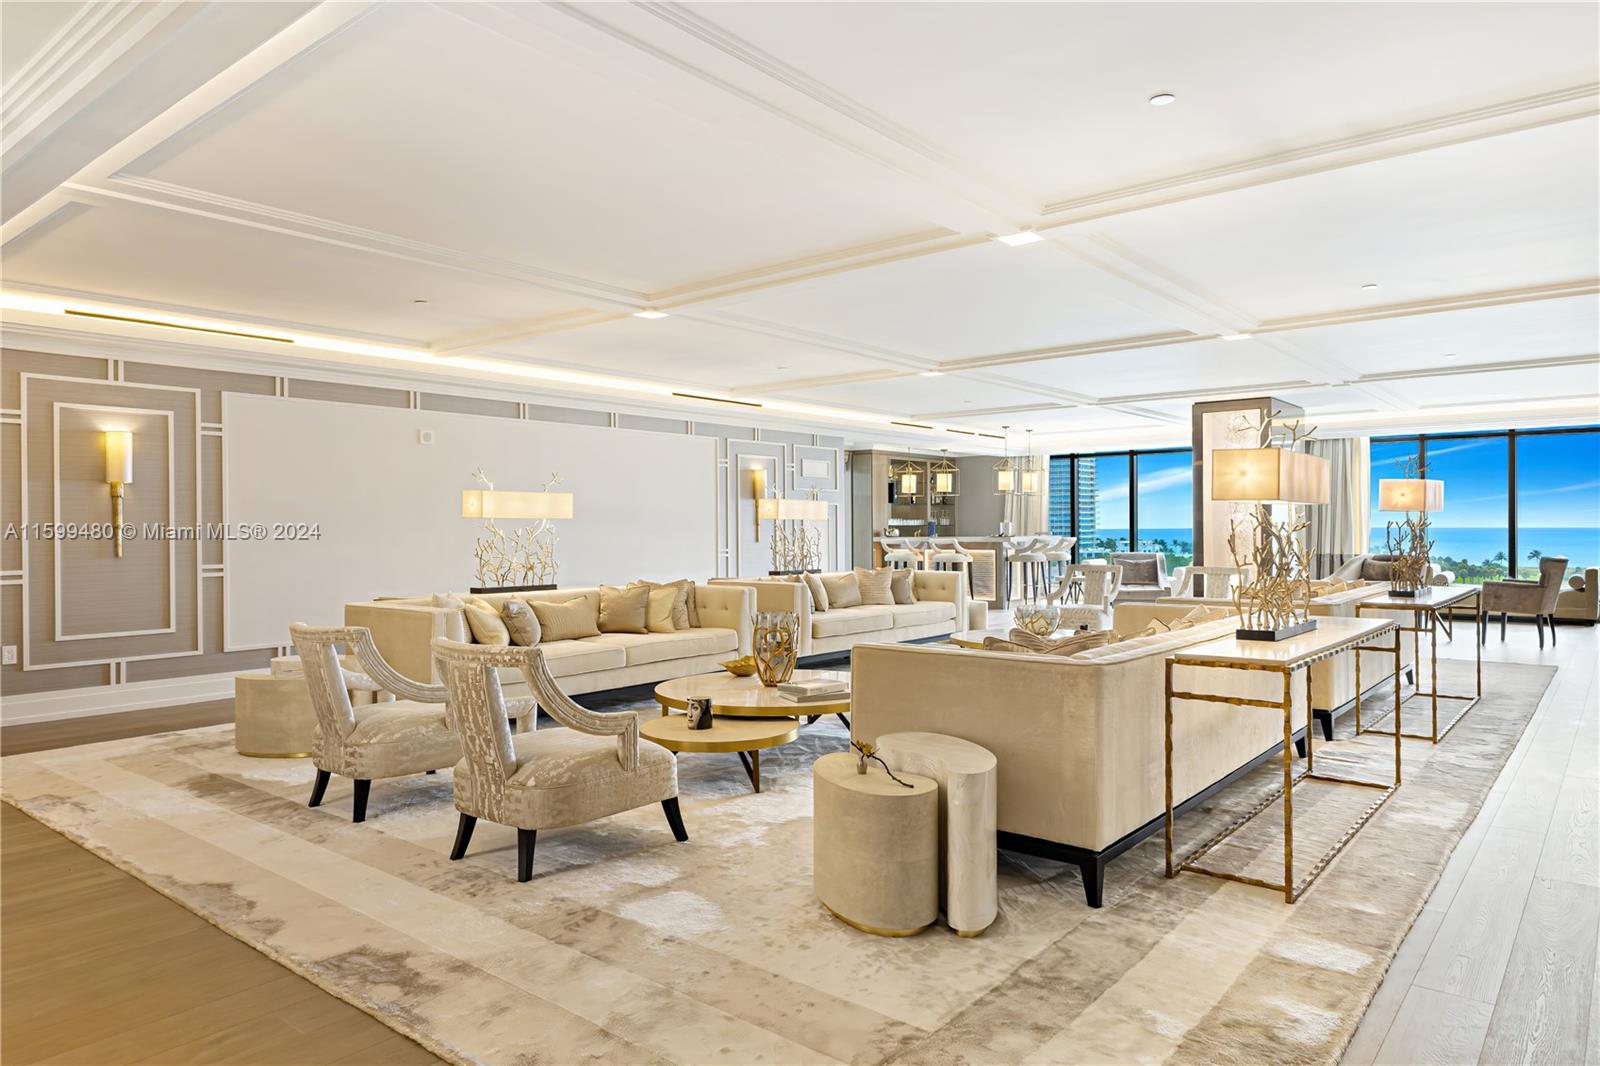 EXPERIENCE THE EPITOME OF LUXURIOUS INTERIOR ARCHITECTURE & DESIGN AT PALAZZO DEL SOL IN FISHER ISLAND FROM THIS SPRAWLING RESIDENCE BY AWARD-WINNING DÔME INTERIORS OF GENEVA! 5 Bed + Service + 5 Bath + 2 Powder Residence w/7,630 SF of Living Area. Immersed in Gold & Beige Tones w/Mother-of-Pearl panels & European Furnishings. 2,471 SF Terraces Overlooking the Ocean, Bay & Golf Course. Entertaining Bar + Study & Theatre. Coffered Ceilings + Hidden Linear Diffusers. Boffi Kitchen features Sub-Zero + Gagganeau Appliances. Glass Enclosed Back-lit Wine Cellar. Primary Suite w/Lavish Hand Painted Wallpaper + lighting by Ochre. Custom Swiss Dressing Room. Primary Bath w/Book-Matched Marble, Boffi Tub & Rain shower. Guest Bedrooms in Ocean Tones w/Custom Millwork. 5-Star Full-Service Building.